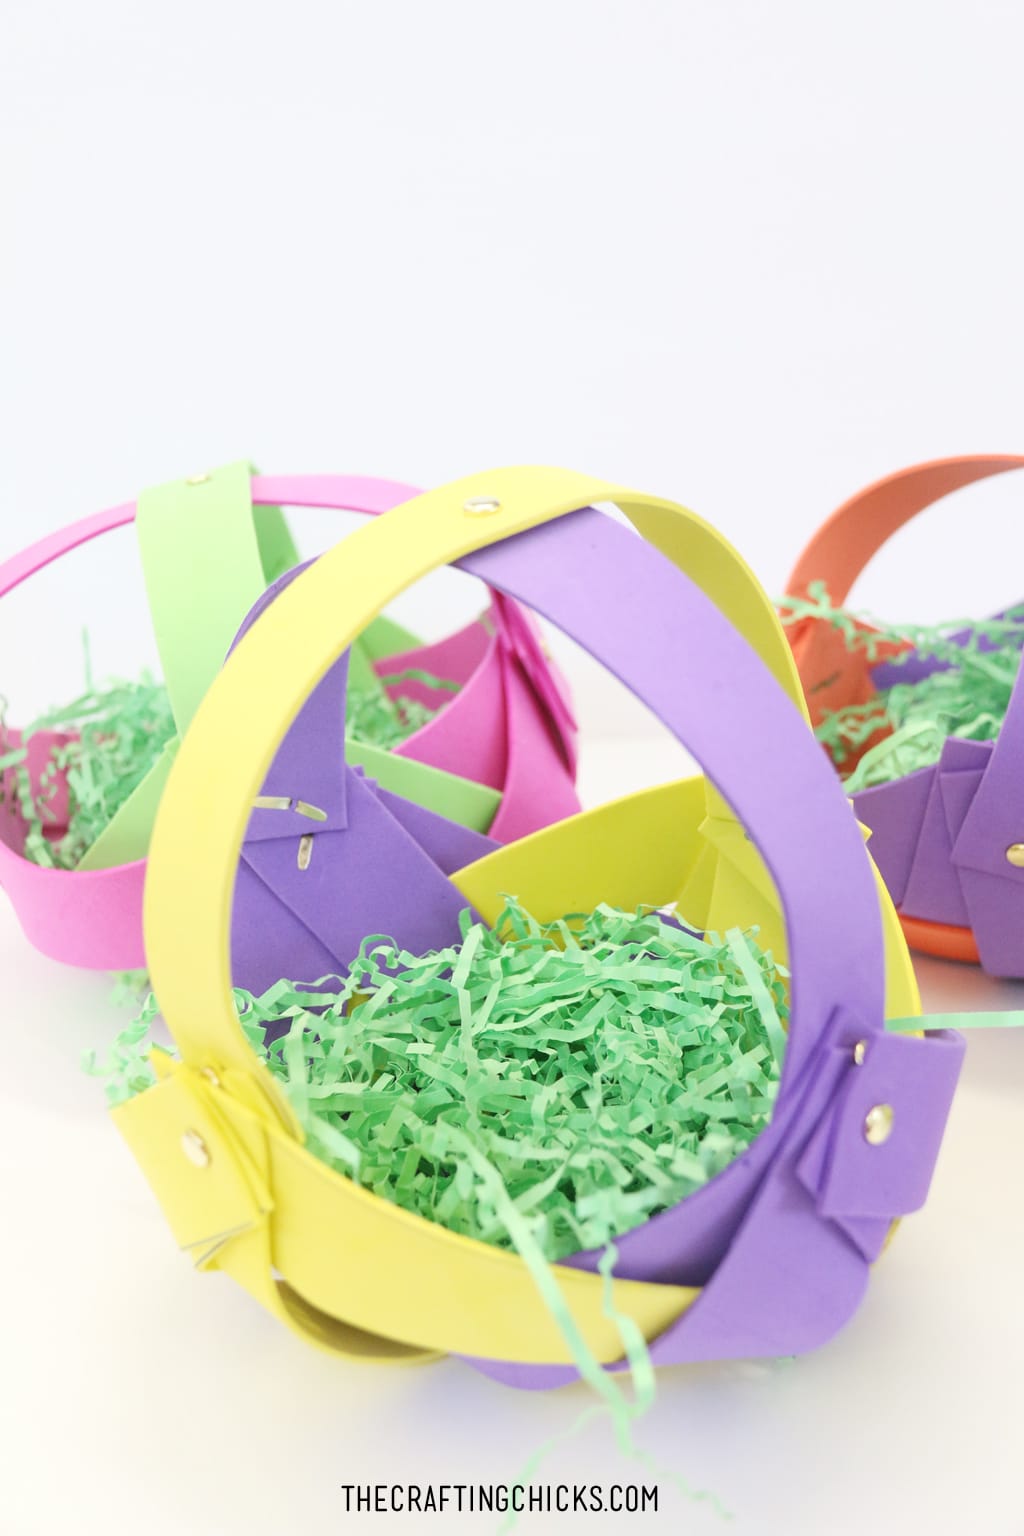 Foam strips woven together to make a basket with brads, filled with green Easter grass.